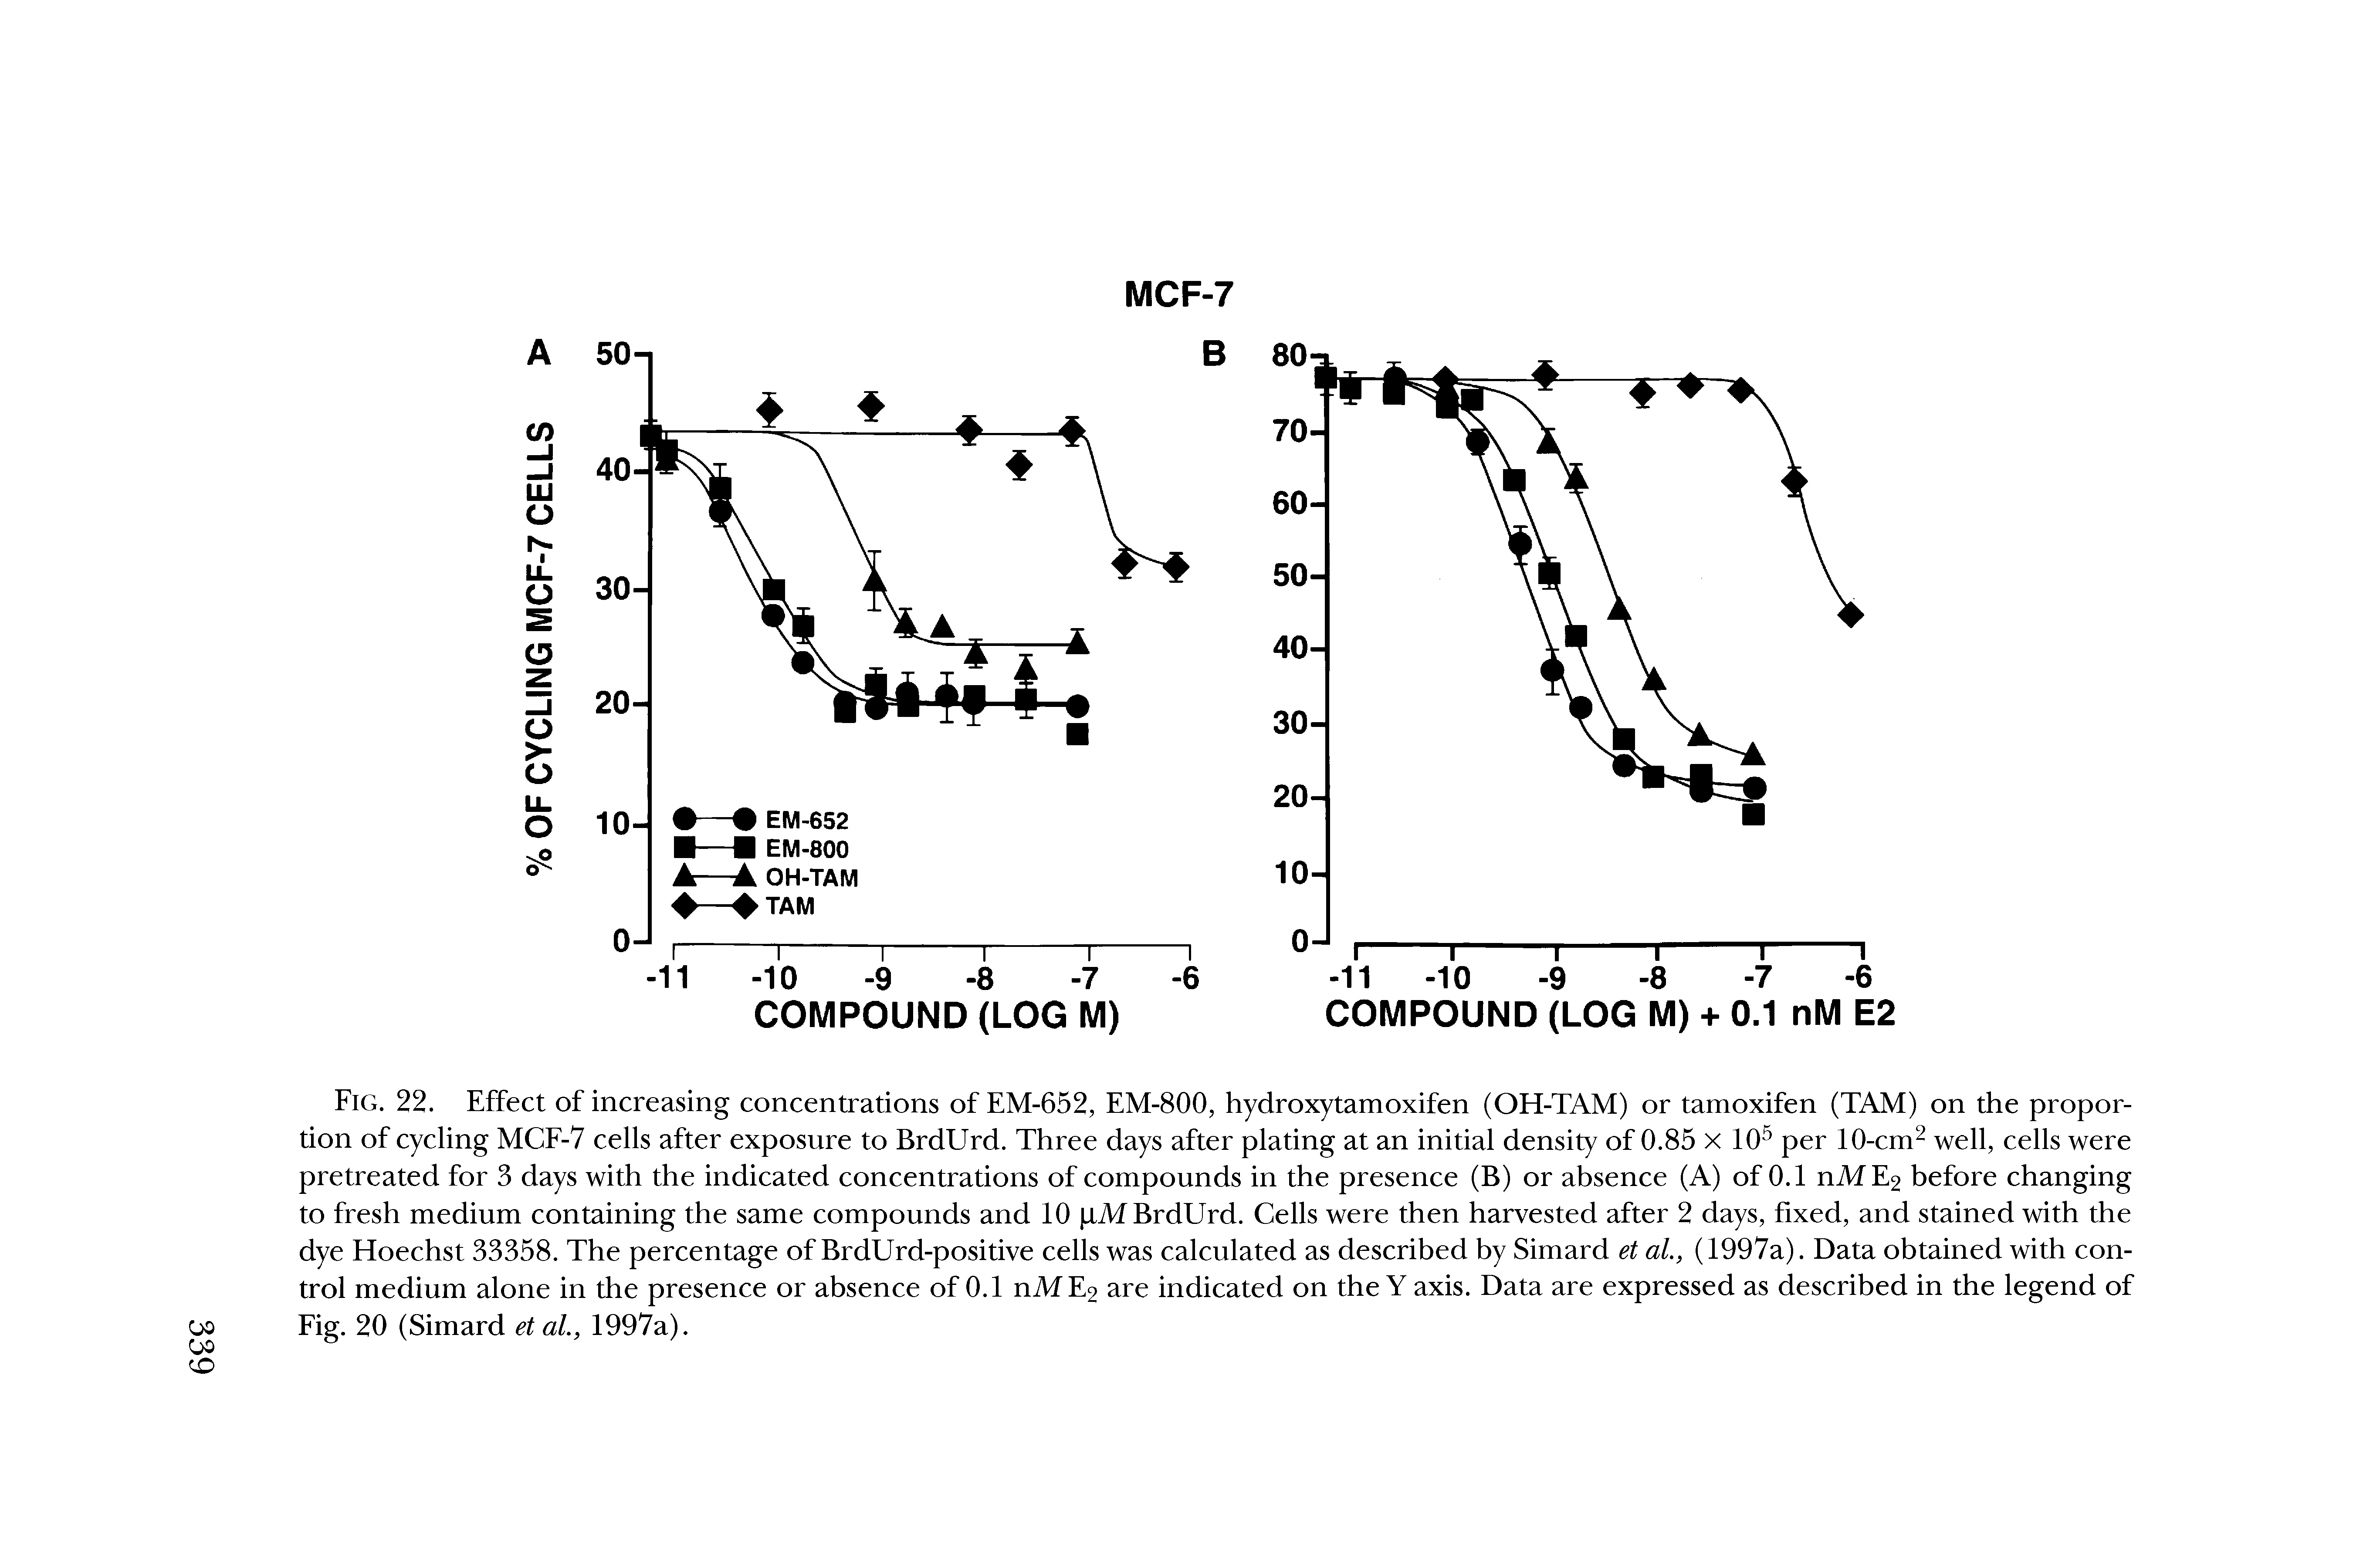 Fig. 22. Effect of increasing concentrations of EM-652, EM-800, hydroxytamoxifen (OH-TAM) or tamoxifen (TAM) on the proportion of cycling MCF-7 cells after exposure to BrdUrd. Three days after plating at an initial density of 0.85 x 105 per 10-cm2 well, cells were pretreated for 3 days with the indicated concentrations of compounds in the presence (B) or absence (A) of 0.1 nME2 before changing to fresh medium containing the same compounds and 10 pM BrdUrd. Cells were then harvested after 2 days, fixed, and stained with the dye Hoechst 33358. The percentage of BrdUrd-positive cells was calculated as described by Simard et al, (1997a). Data obtained with control medium alone in the presence or absence of 0.1 nME2 are indicated on the Y axis. Data are expressed as described in the legend of Fig. 20 (Simard et al., 1997a).